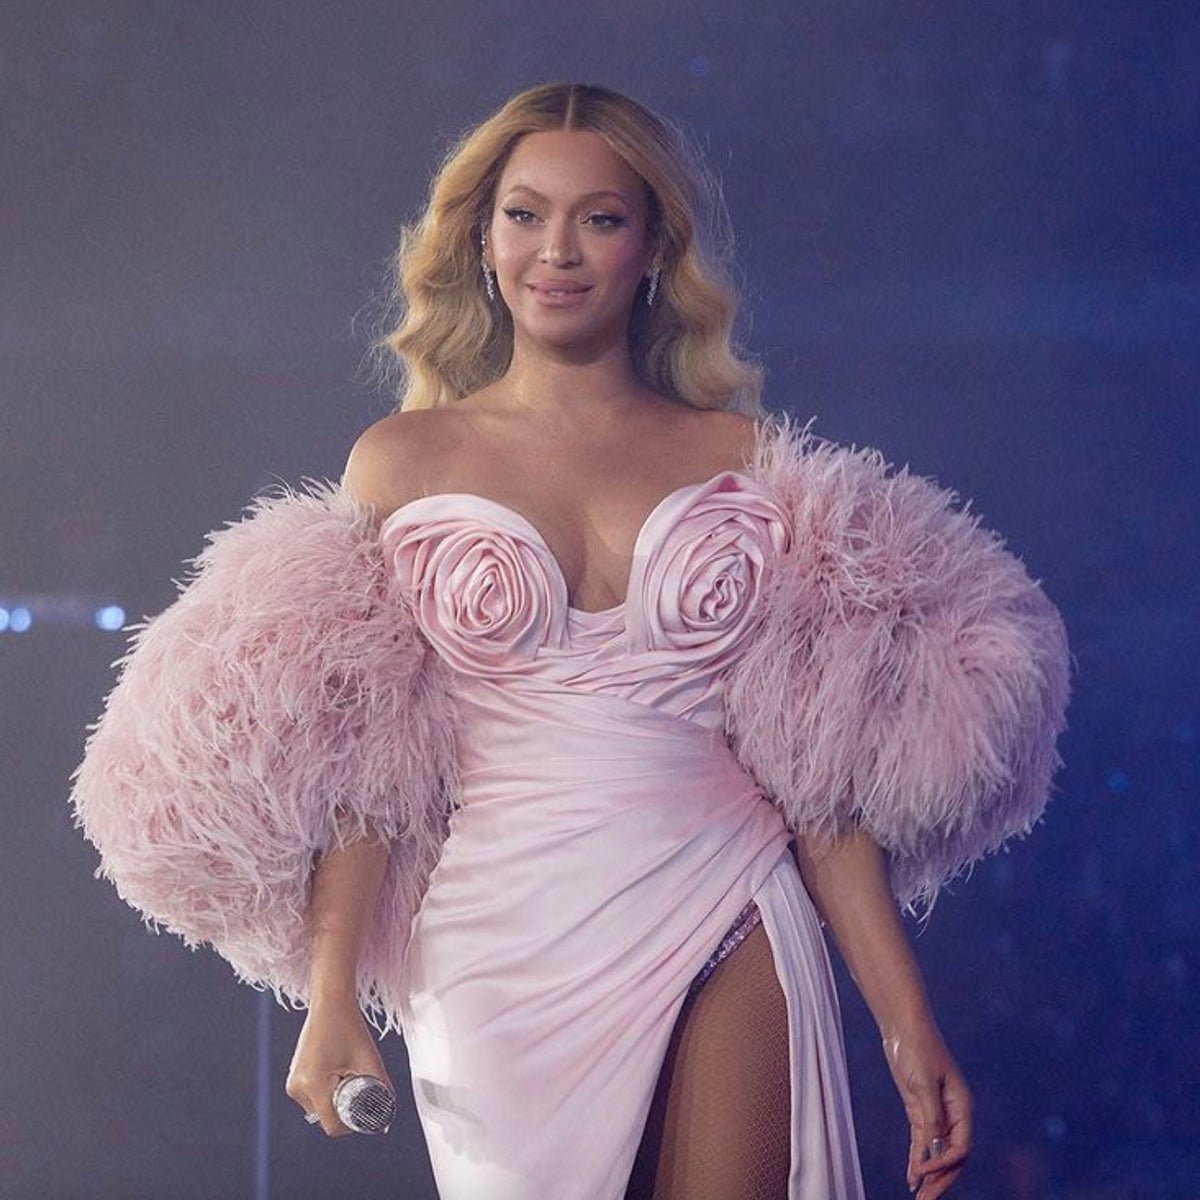 Beyoncé's Renaissance – live: Inside the London premiere of her record-breaking world tour | The Independent